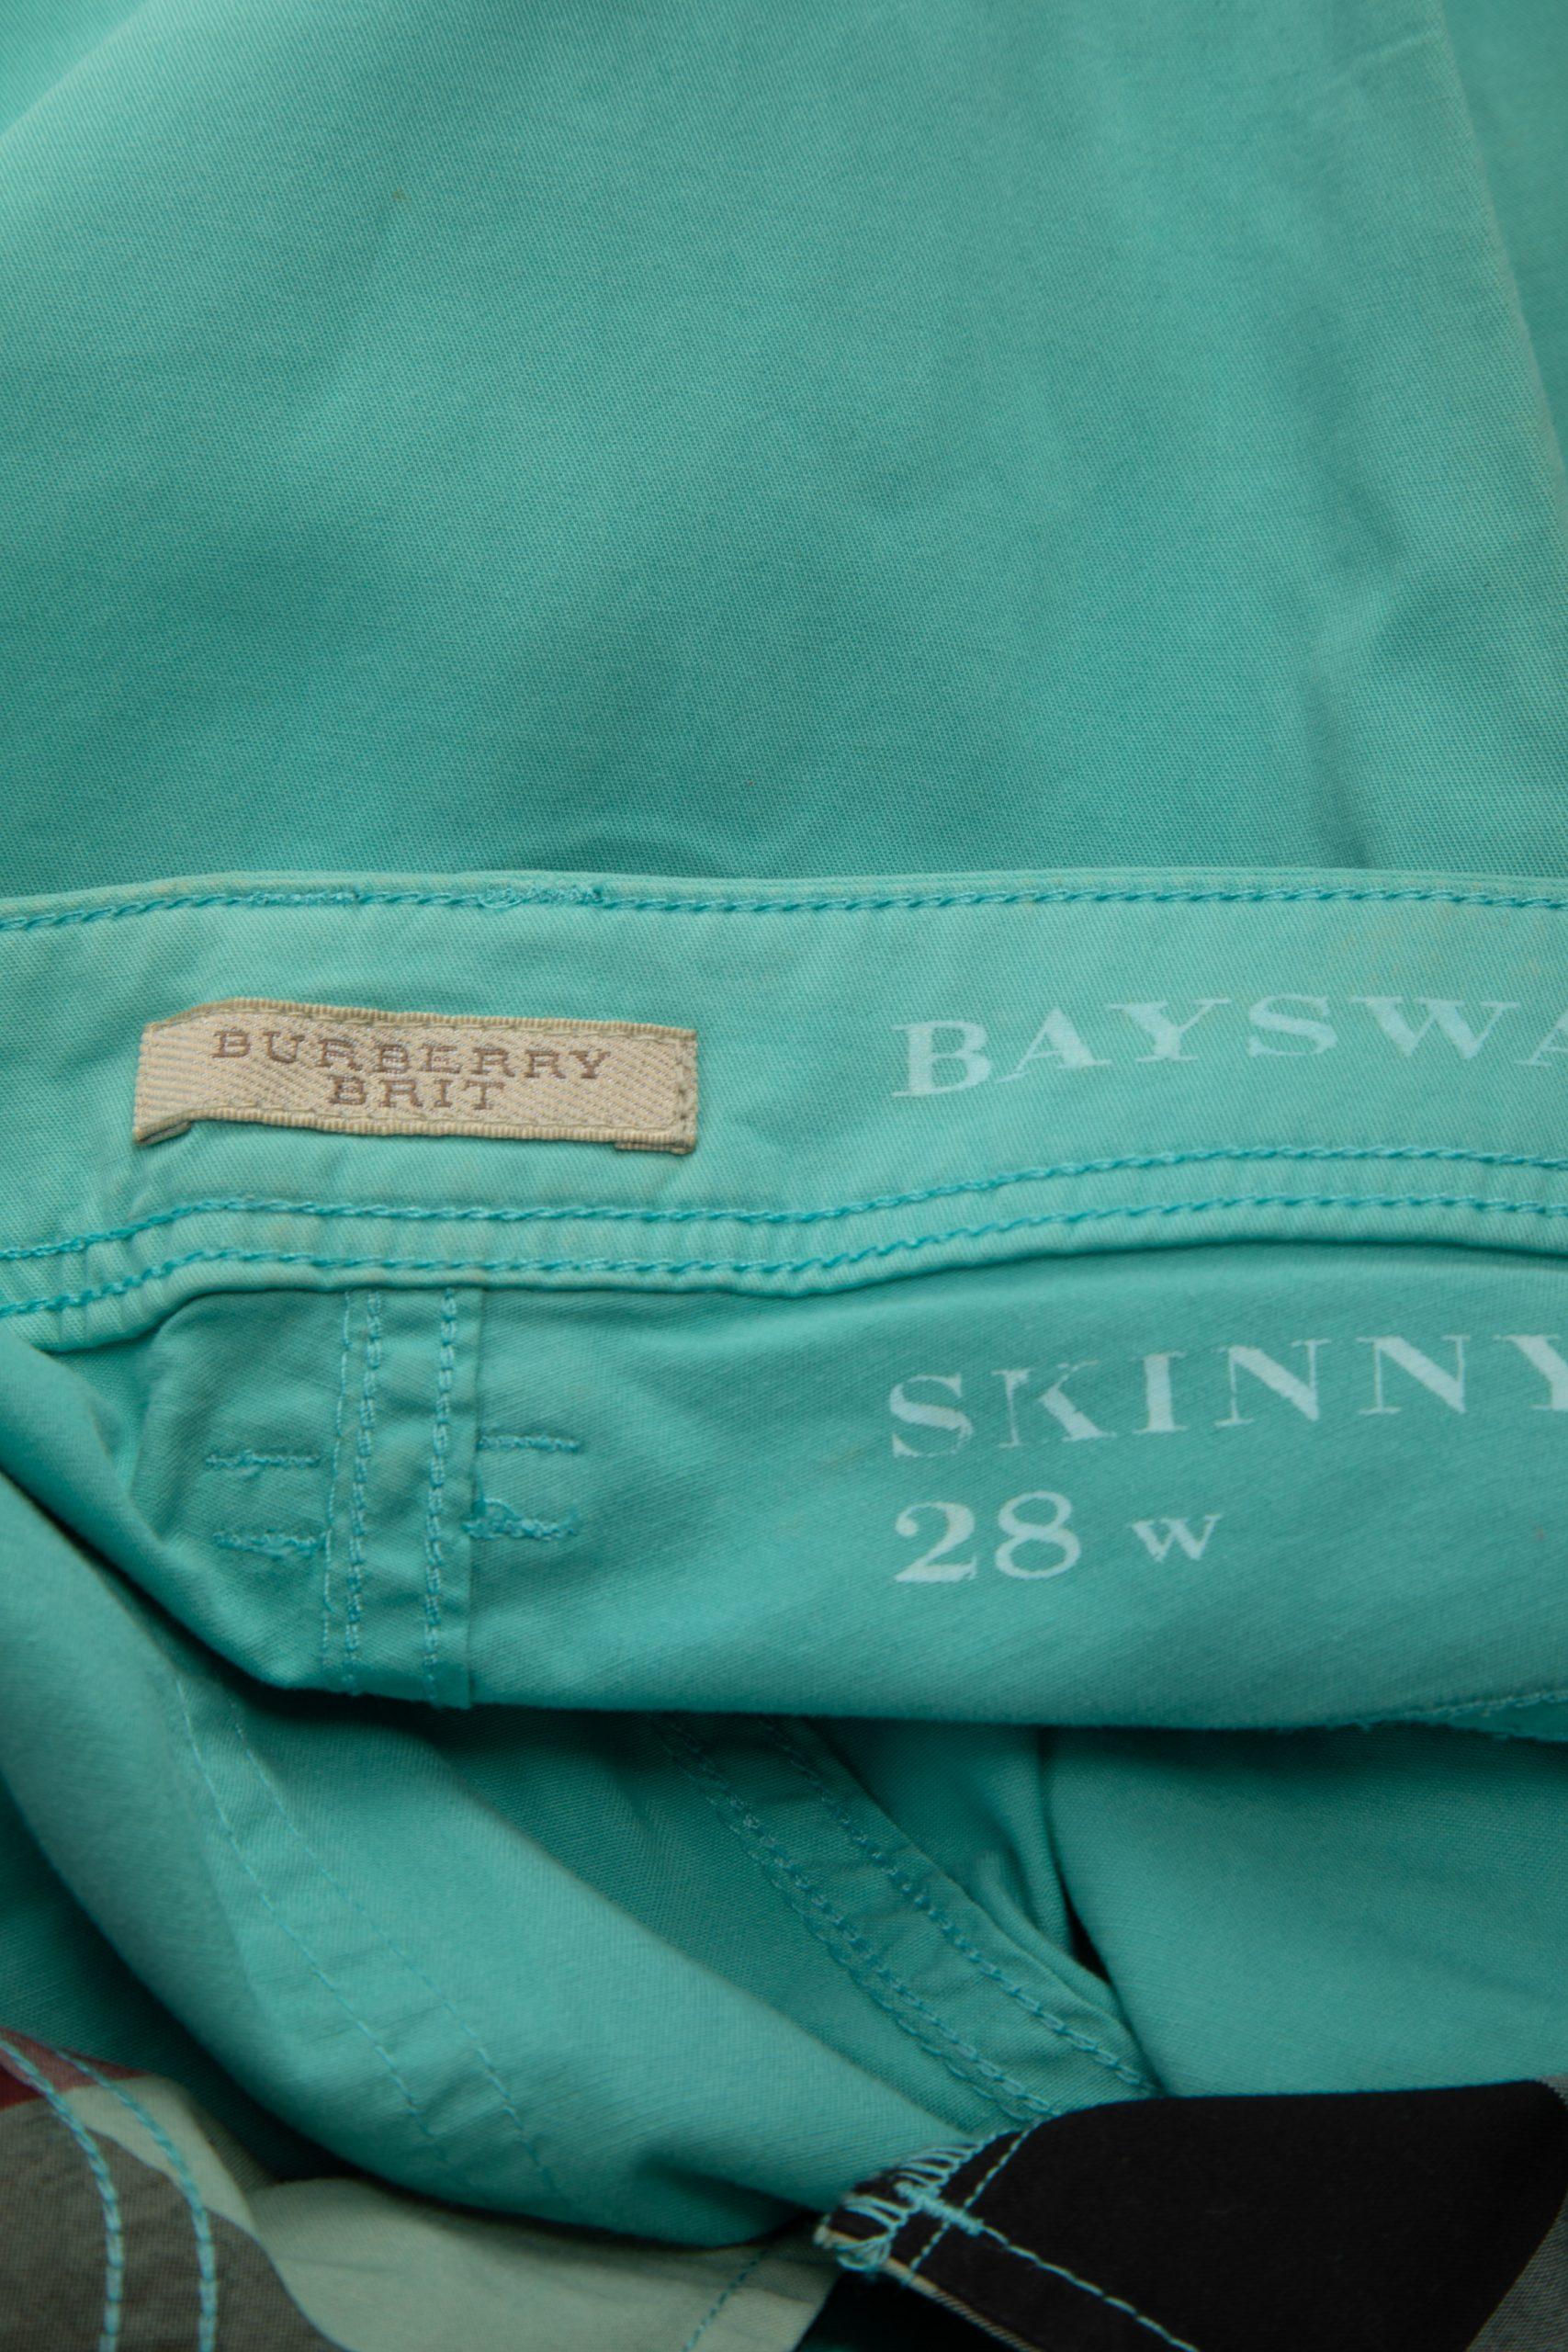 Burberry Brit Turquoise Bayswater Skinny Ankle Zip Trousers Size M 1